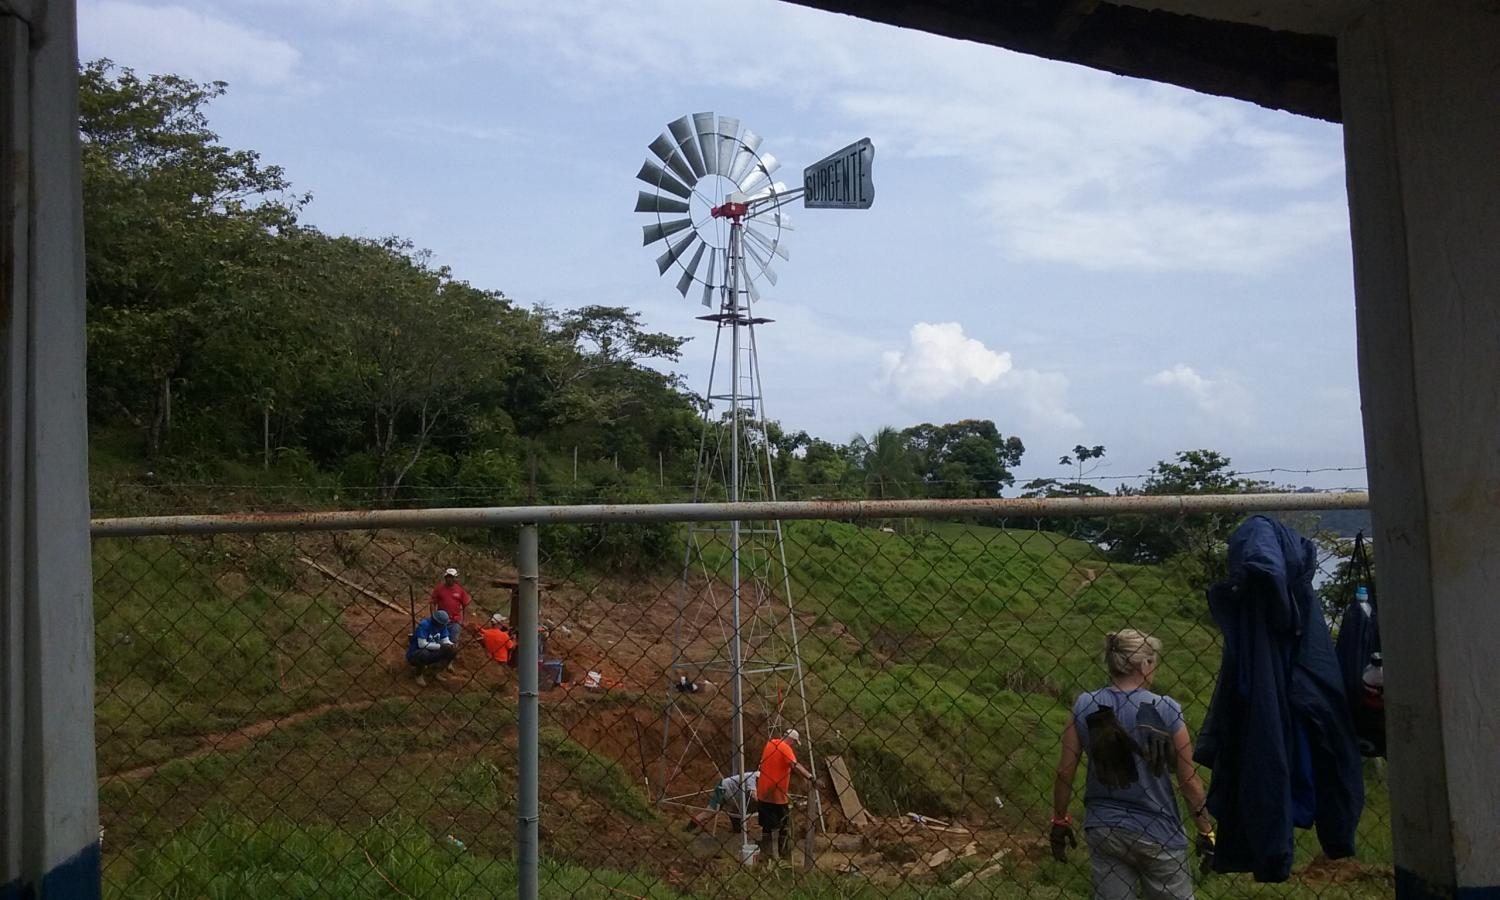 The+finished+windmill+provided+fresh+water+for+the+people+living+in+Panama.